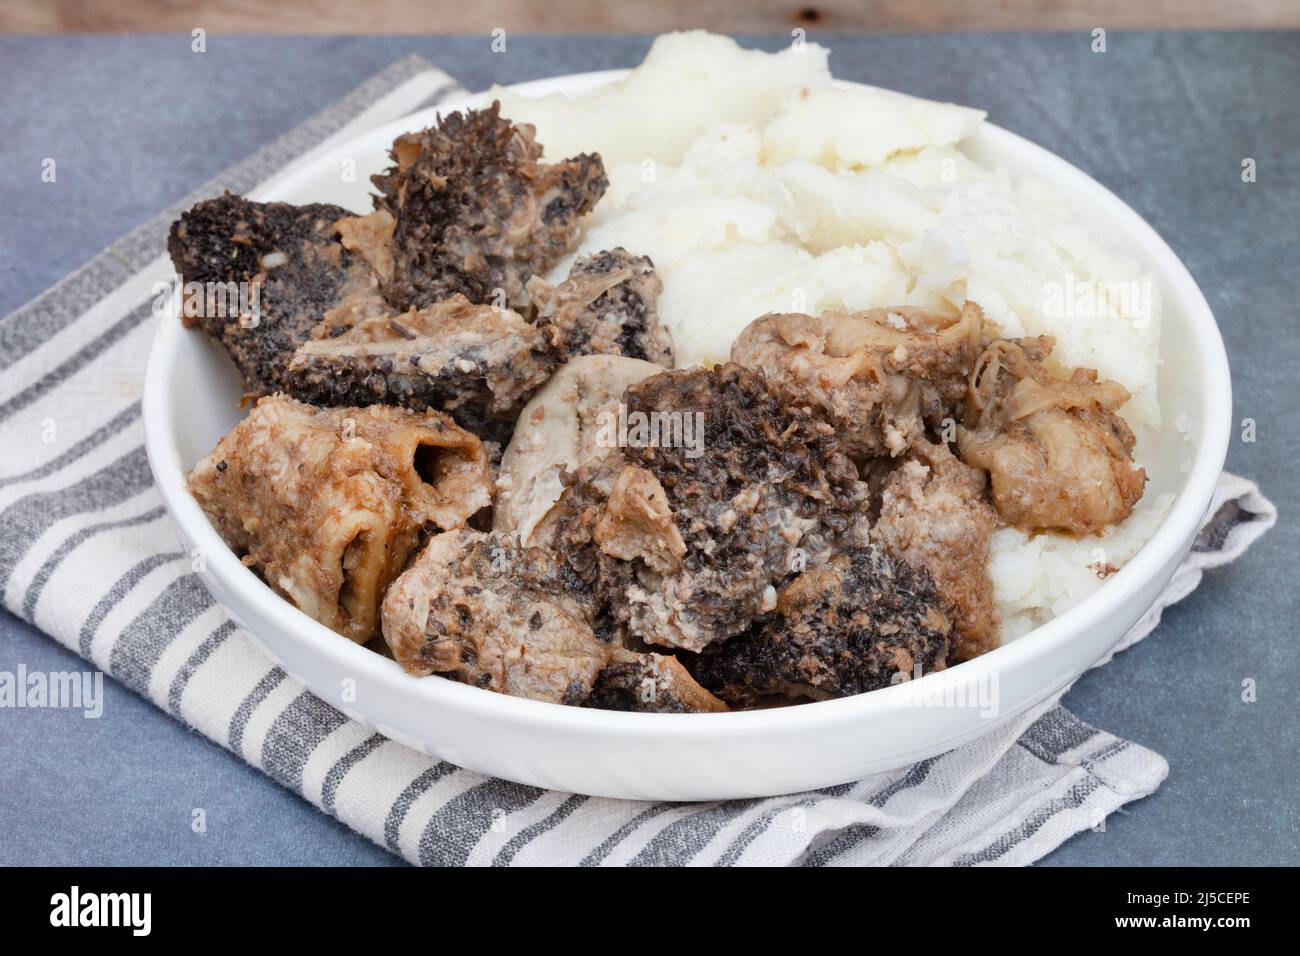 Mogodu, a Traditional South African stew made of chopped innards of a cow or tripe served with pap or maize meal. Stock Photo